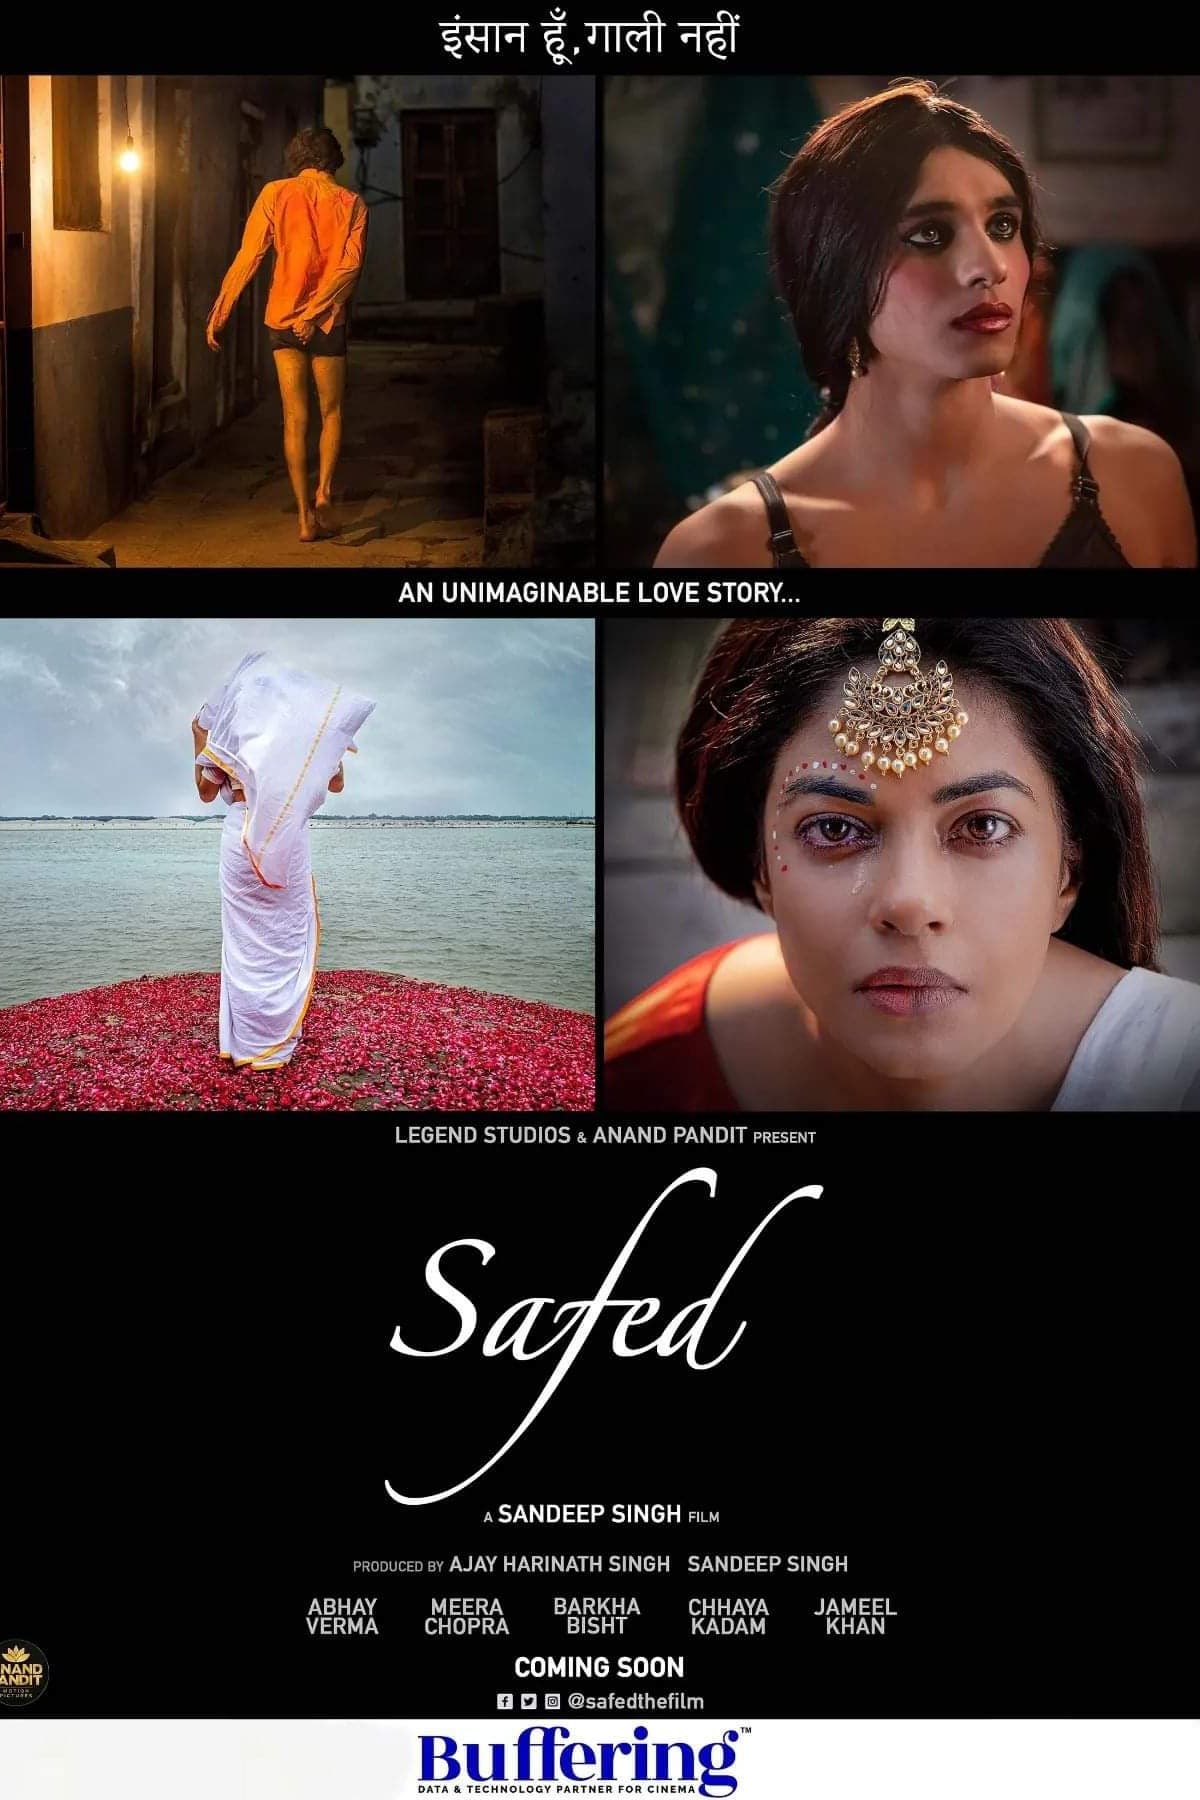 Poster for the movie "Safed"